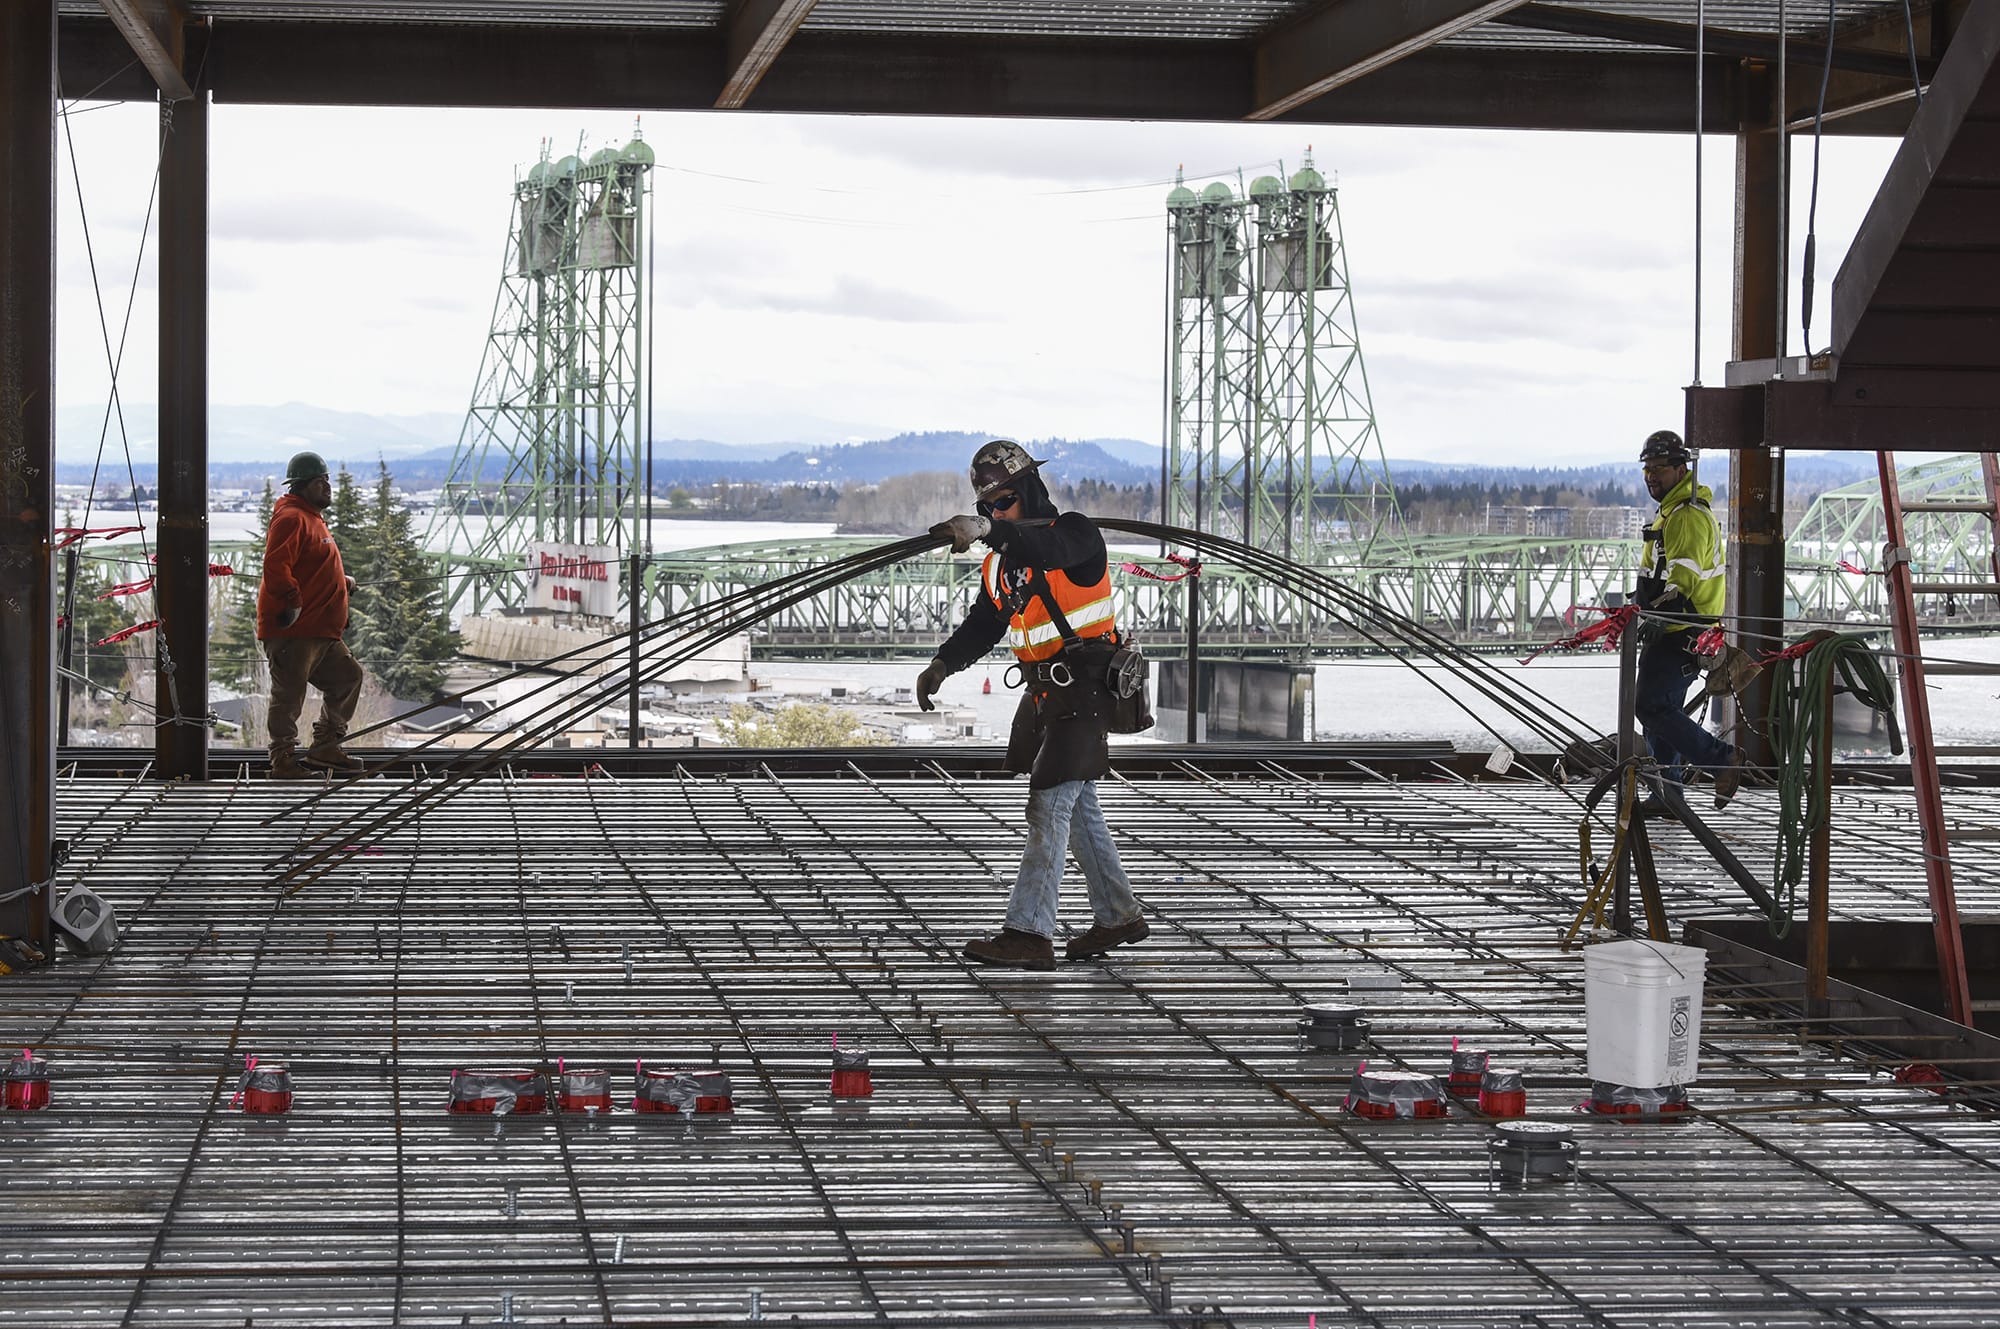 Fidel Camacho, center, of Farwest Steel, moves rebar on the sixth floor of the seven-story office tower at the Vancouver waterfront, Friday March 23, 2018. Crews were laying down rebar Friday to prepare for pouring concrete on the sixth floor this coming Monday.